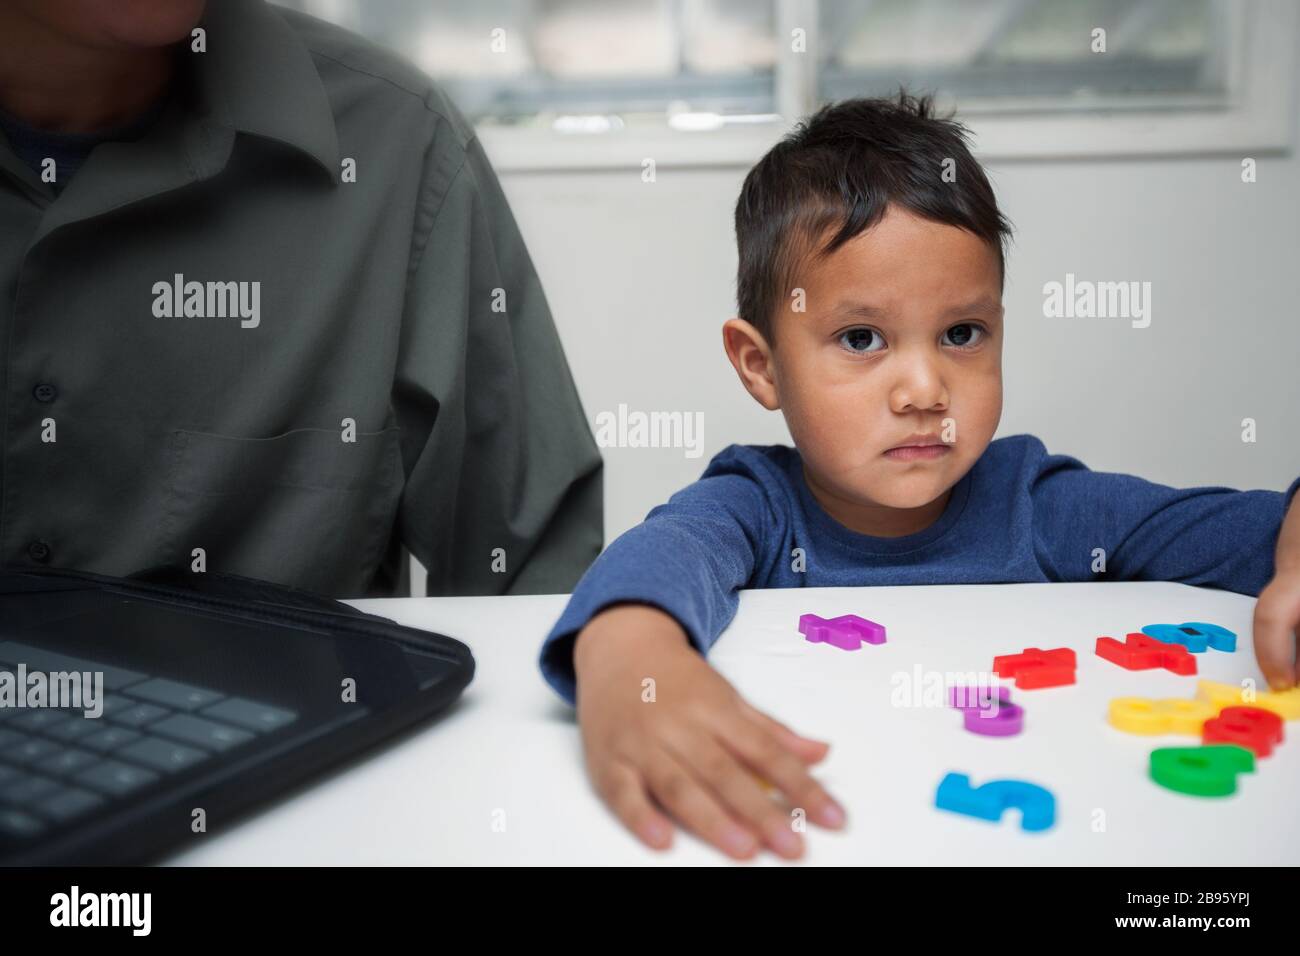 A preschooler displaying learning difficulties in a home setting where he is being evaluated to identify learning disorders. Stock Photo